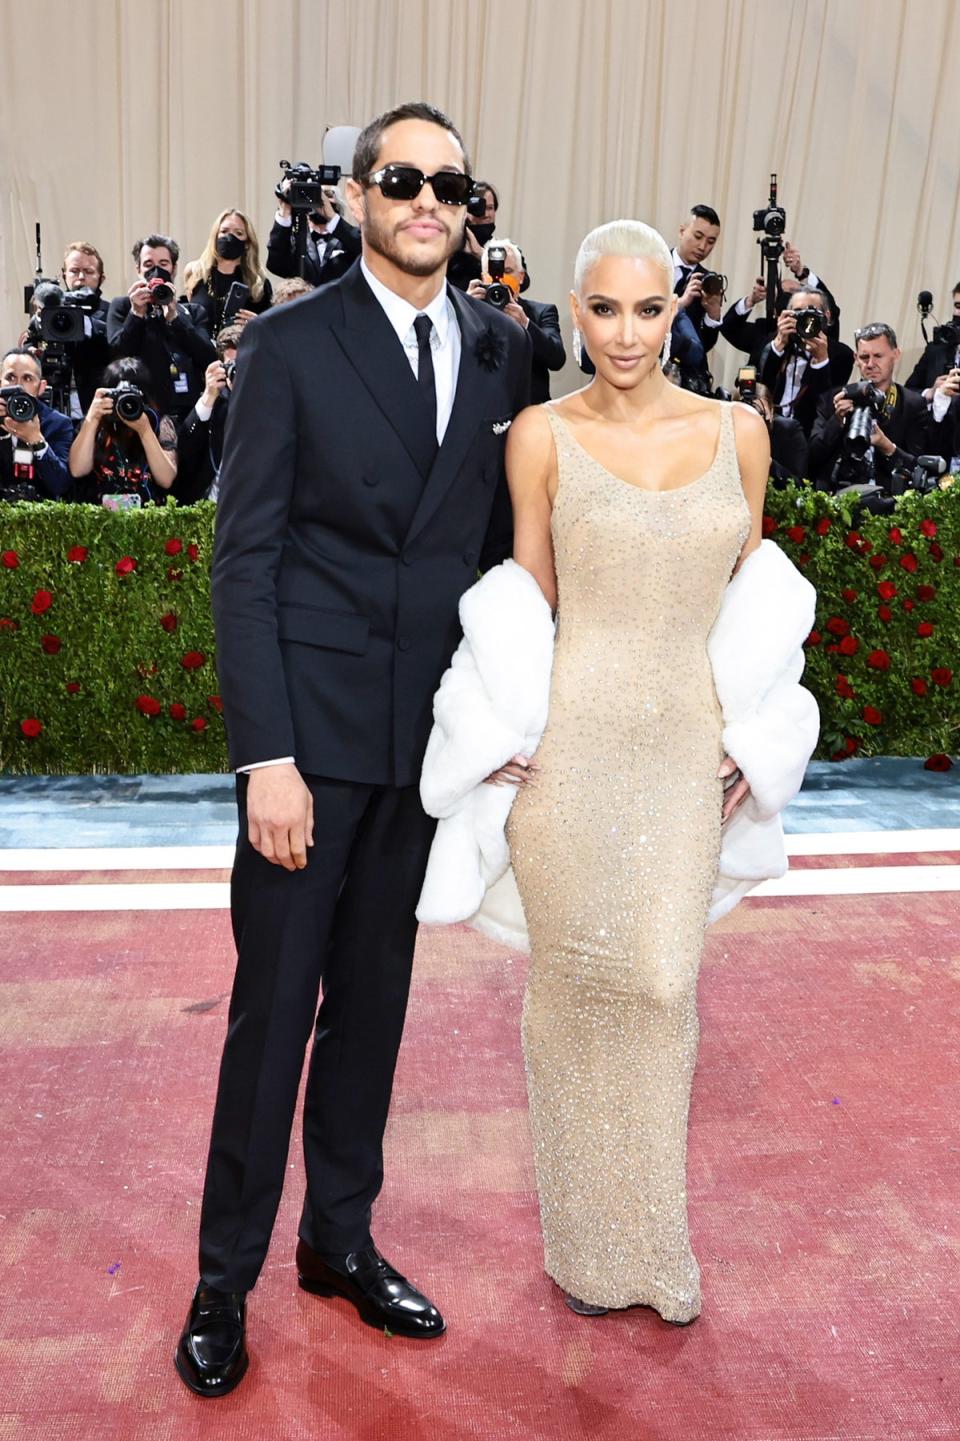 Kim Kardashian attended the Met Gala with her boyfriend, Pete Davidson (Getty Images)